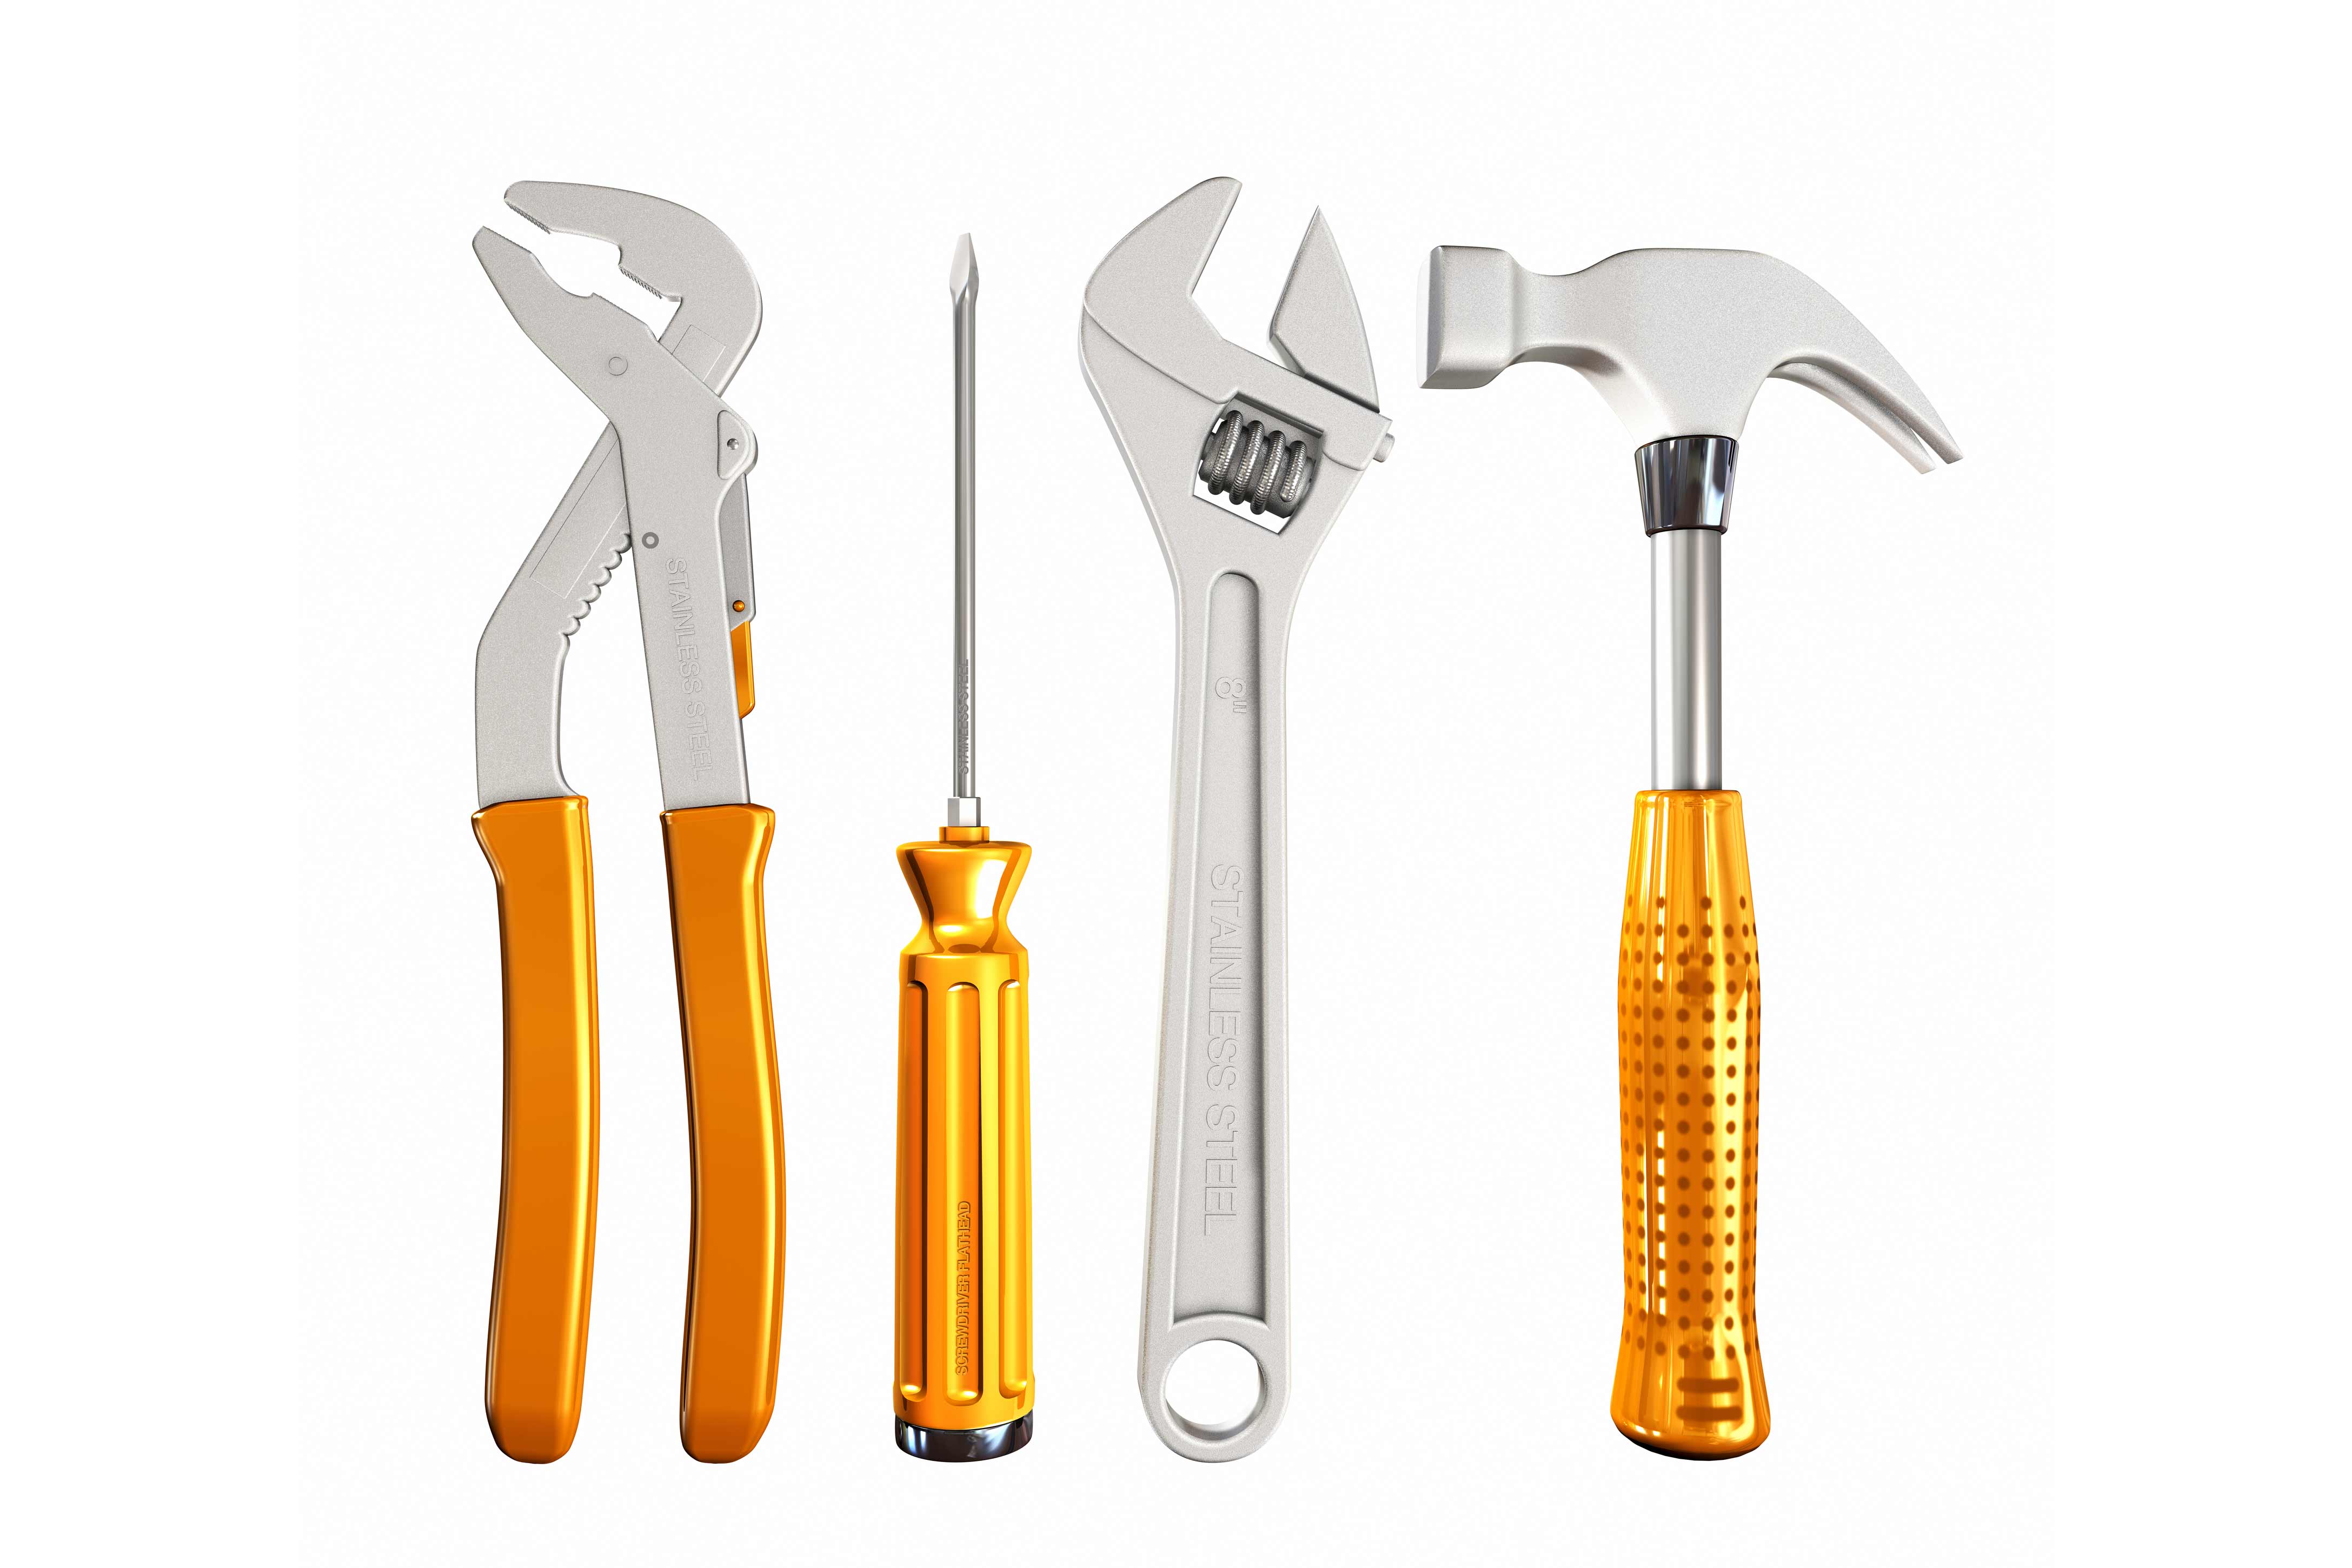 The List of Hand Tools Your Business Should Have - Grainger KnowHow